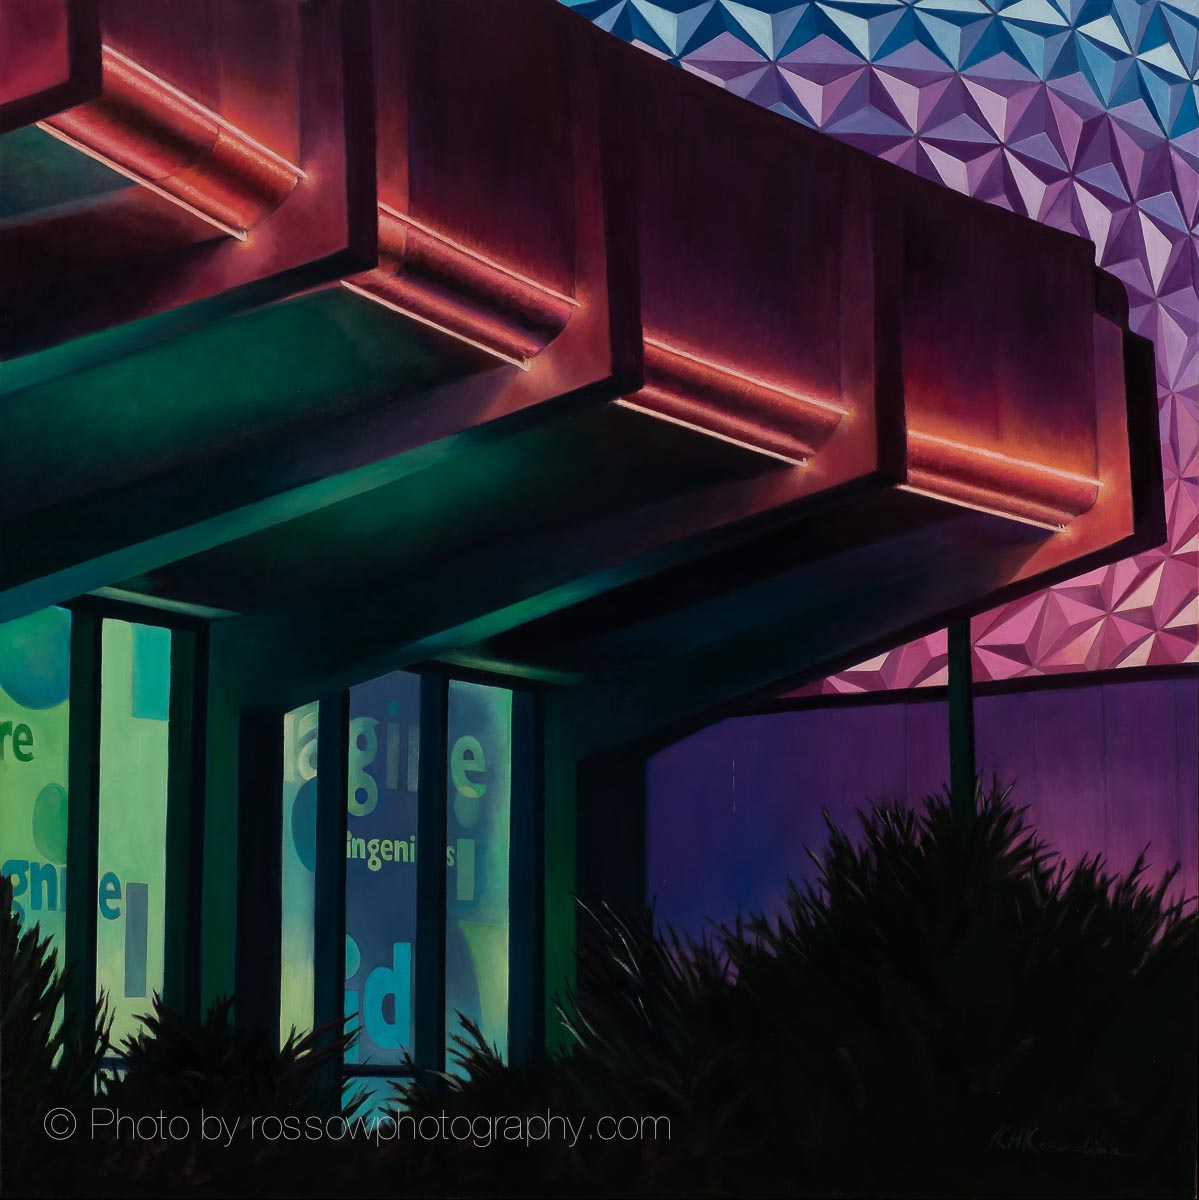 Kevin Komadina painting photographed by Mitch Rossow - EPCOT